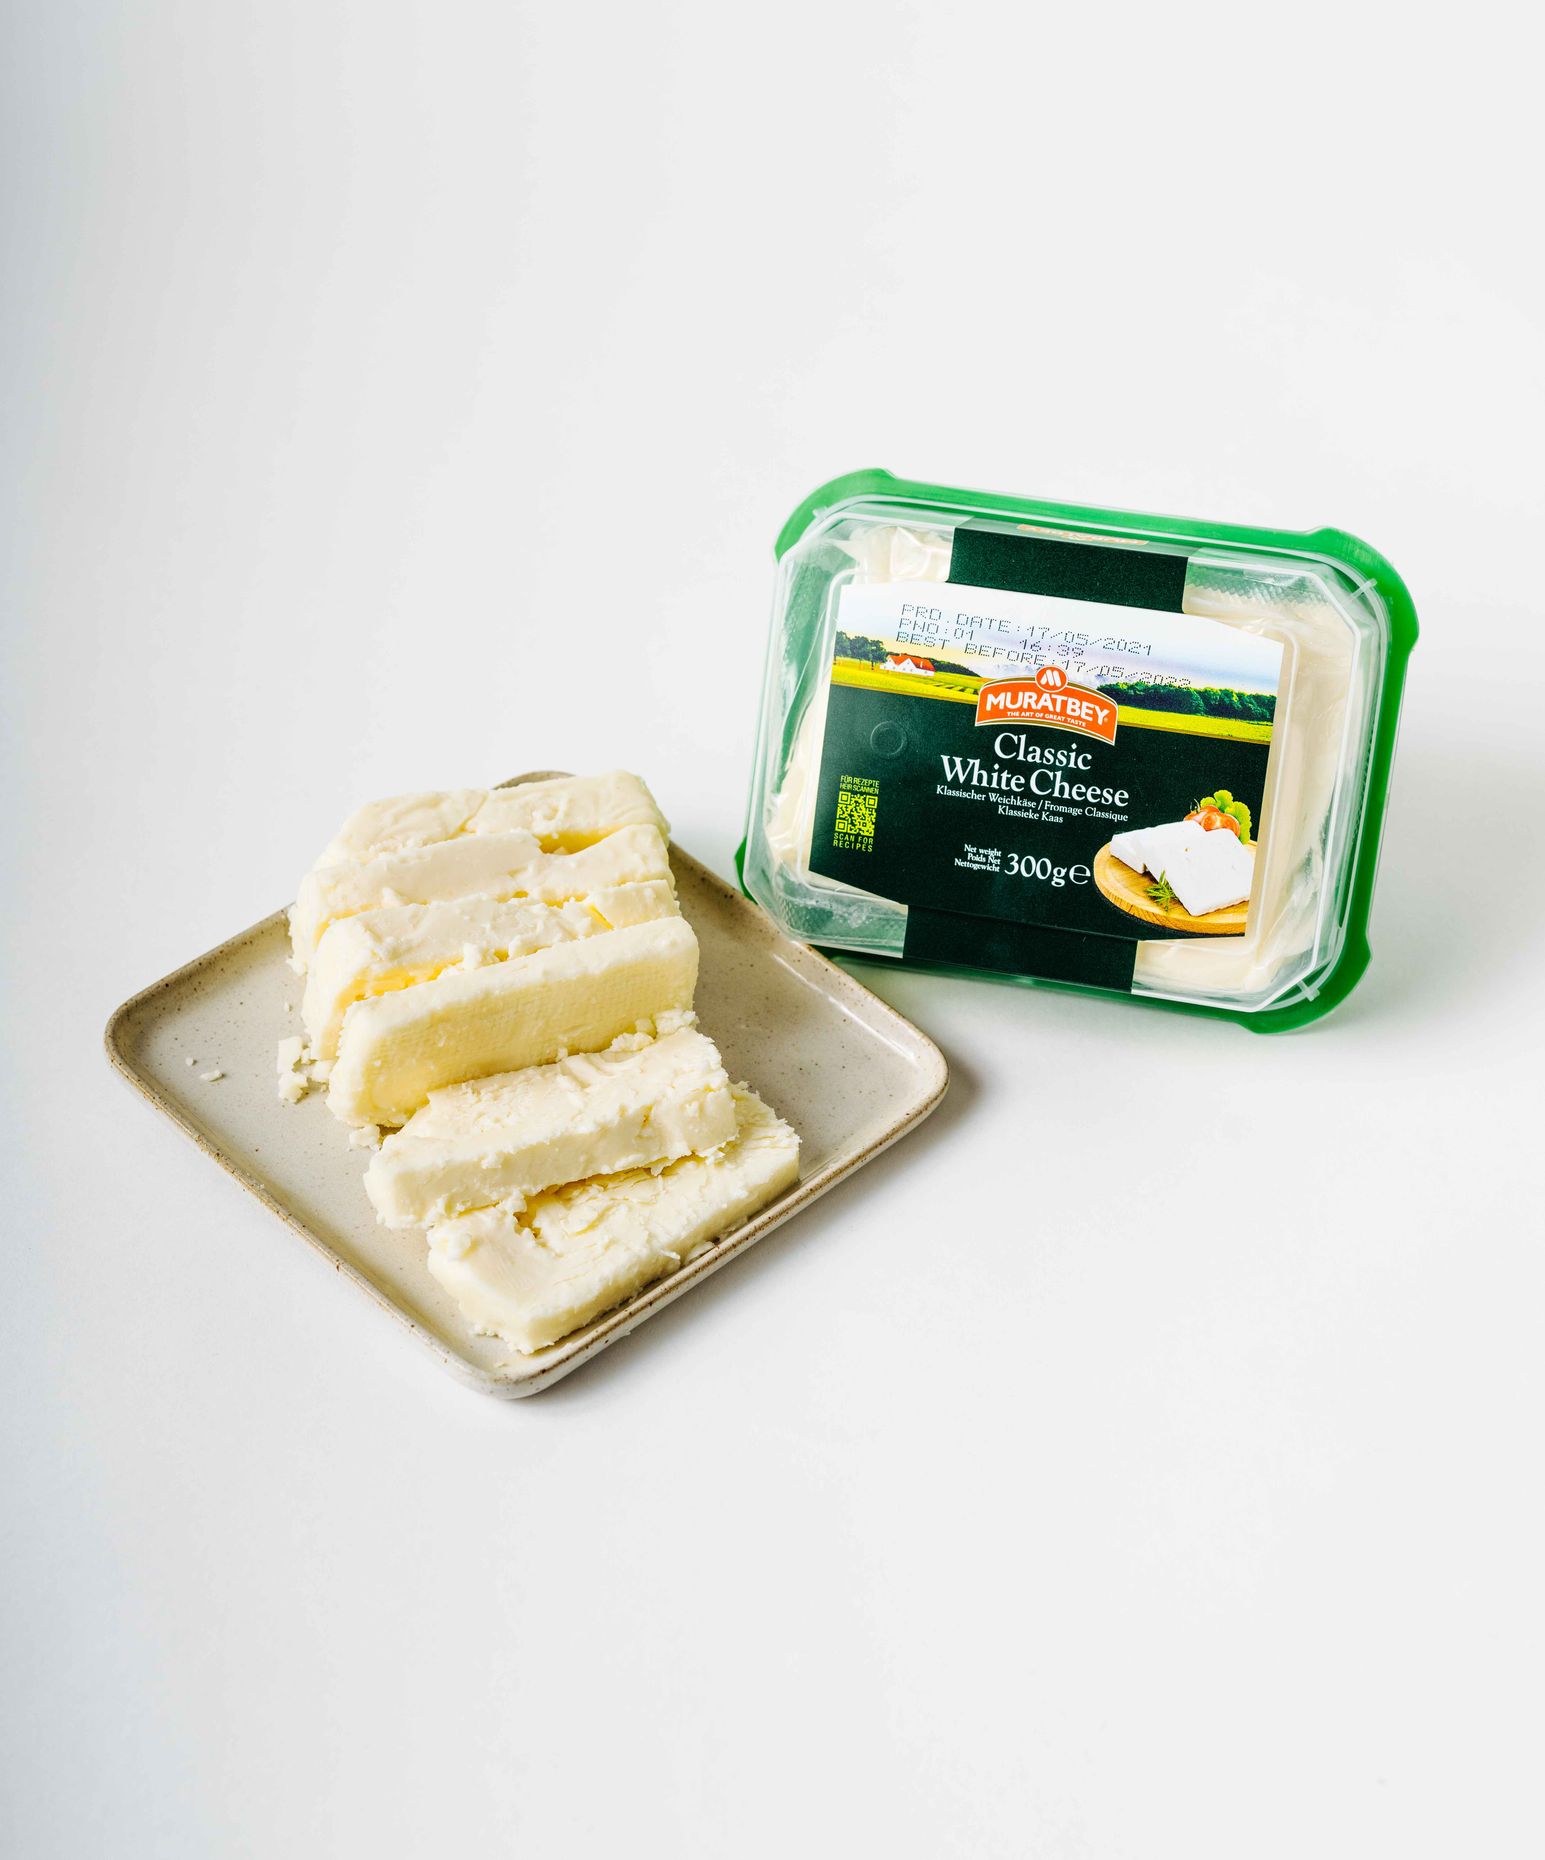 Muratbey Classic White Cheese